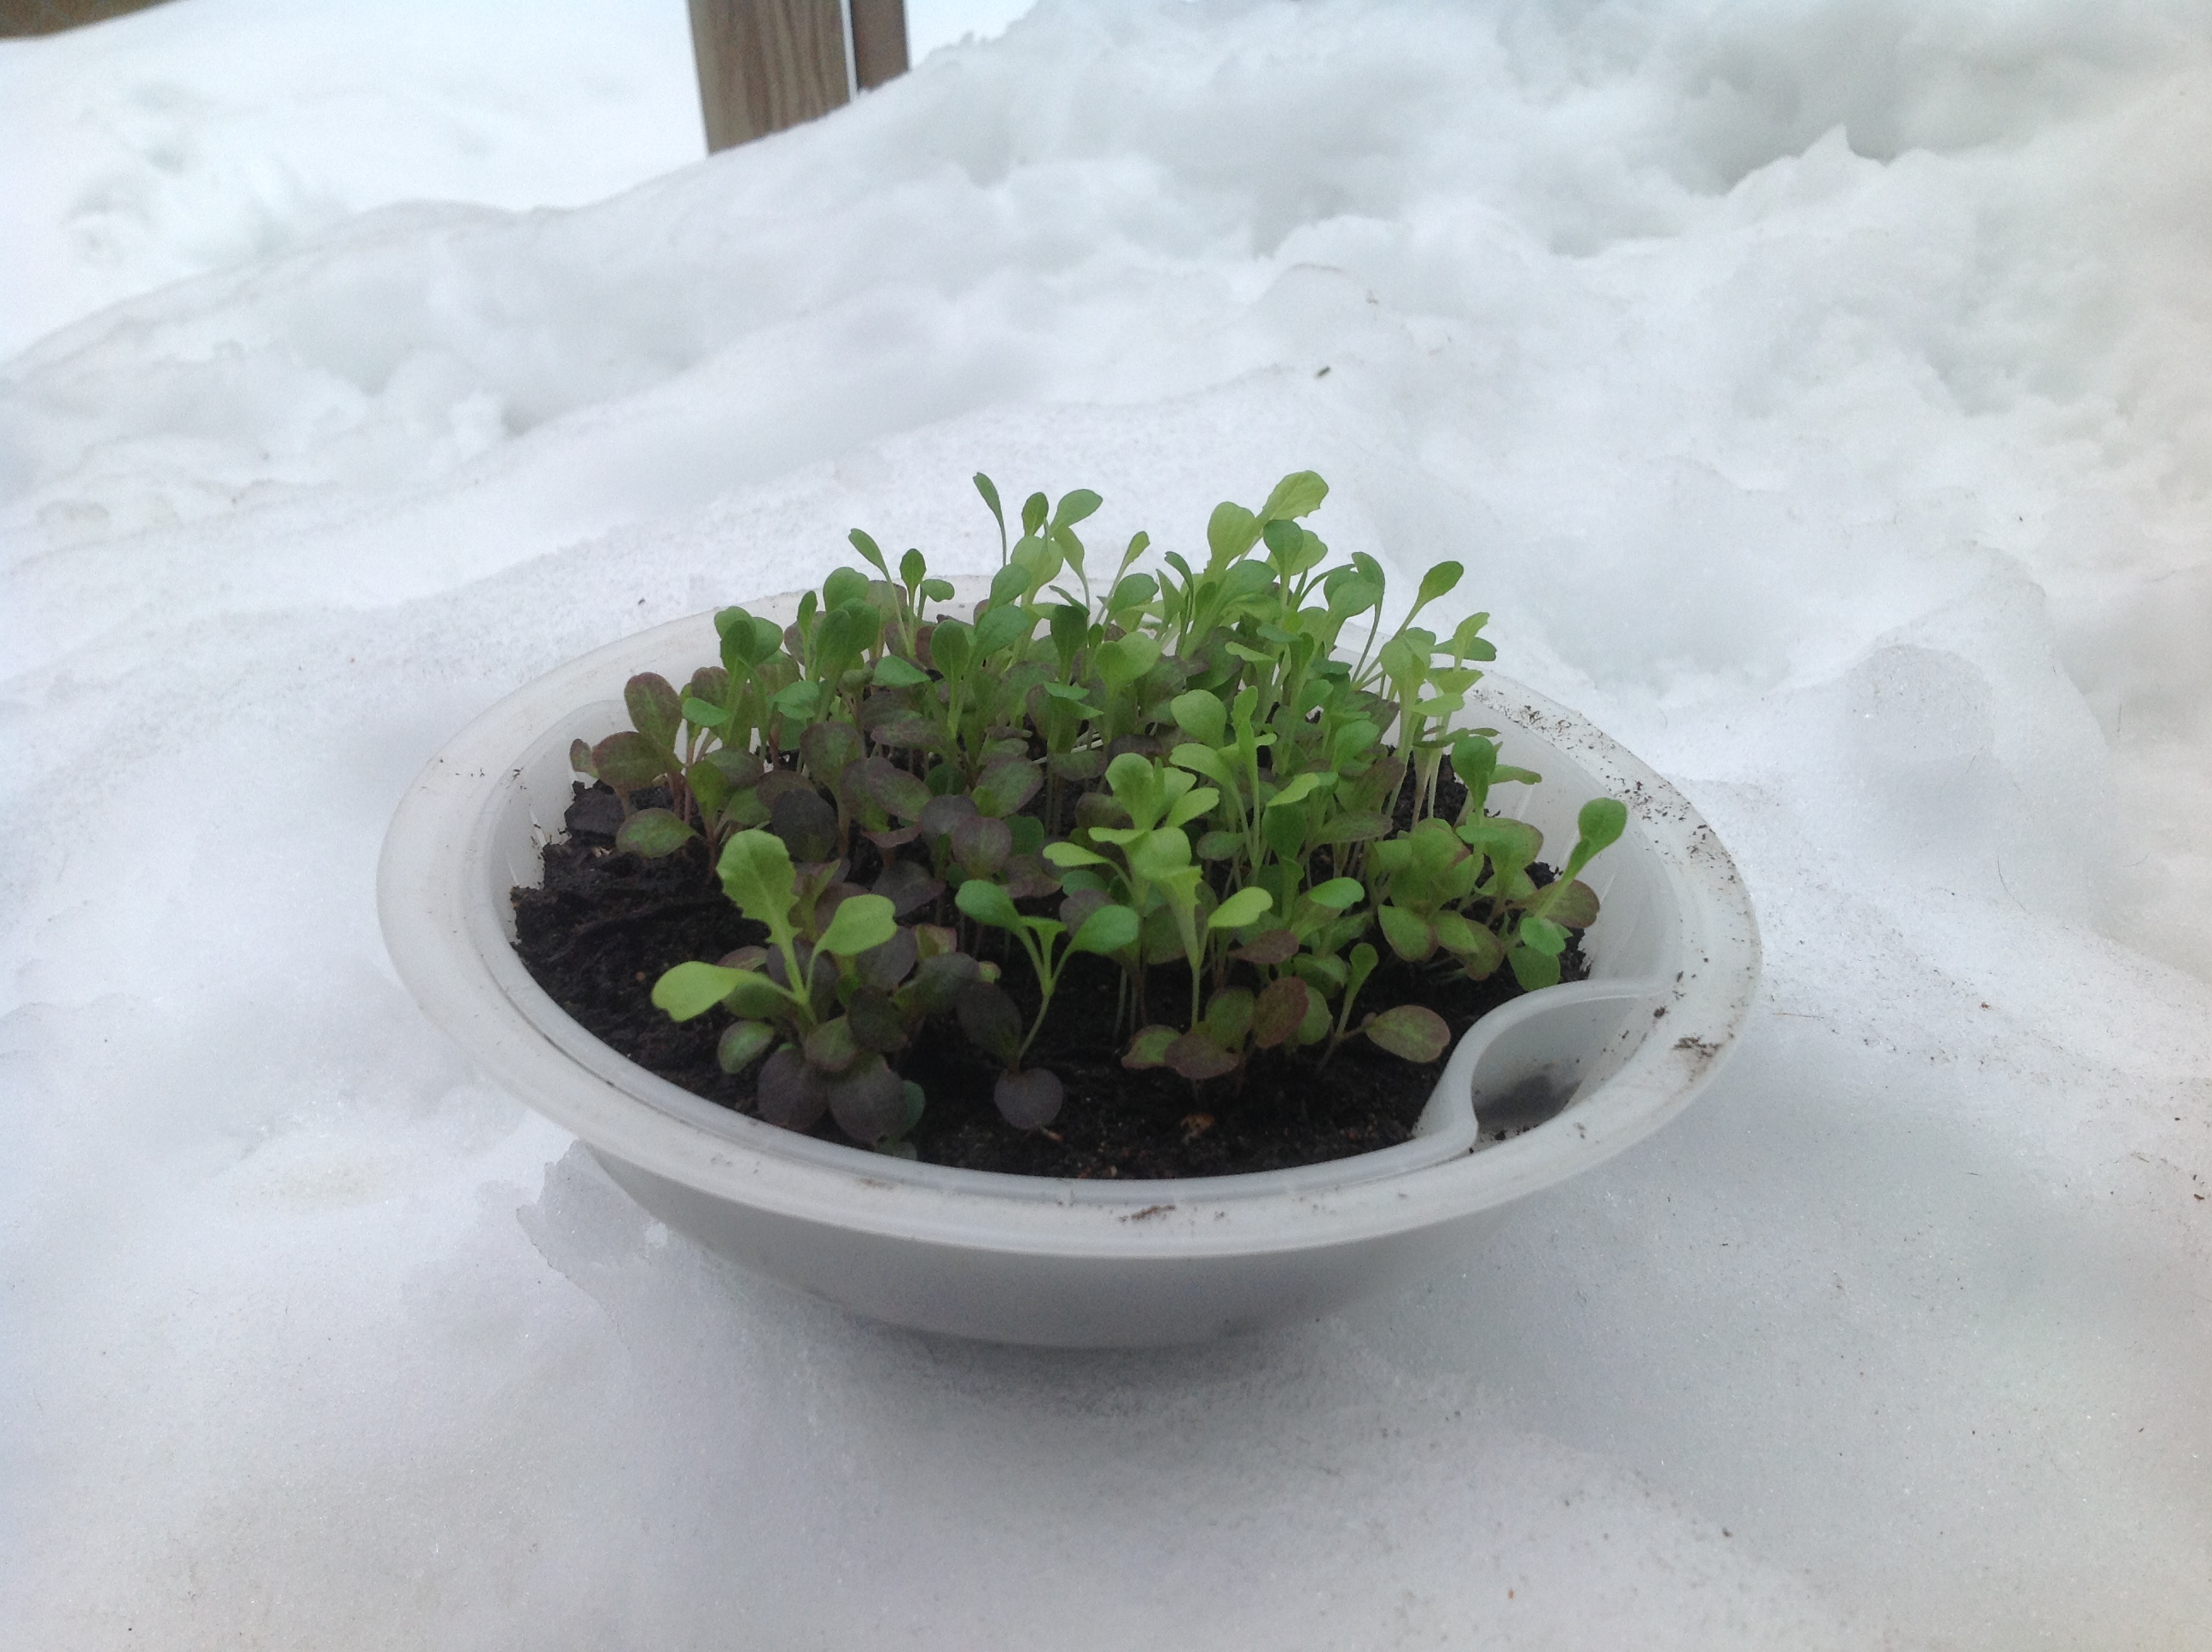 Lettuce in the steamer sitting on the snow